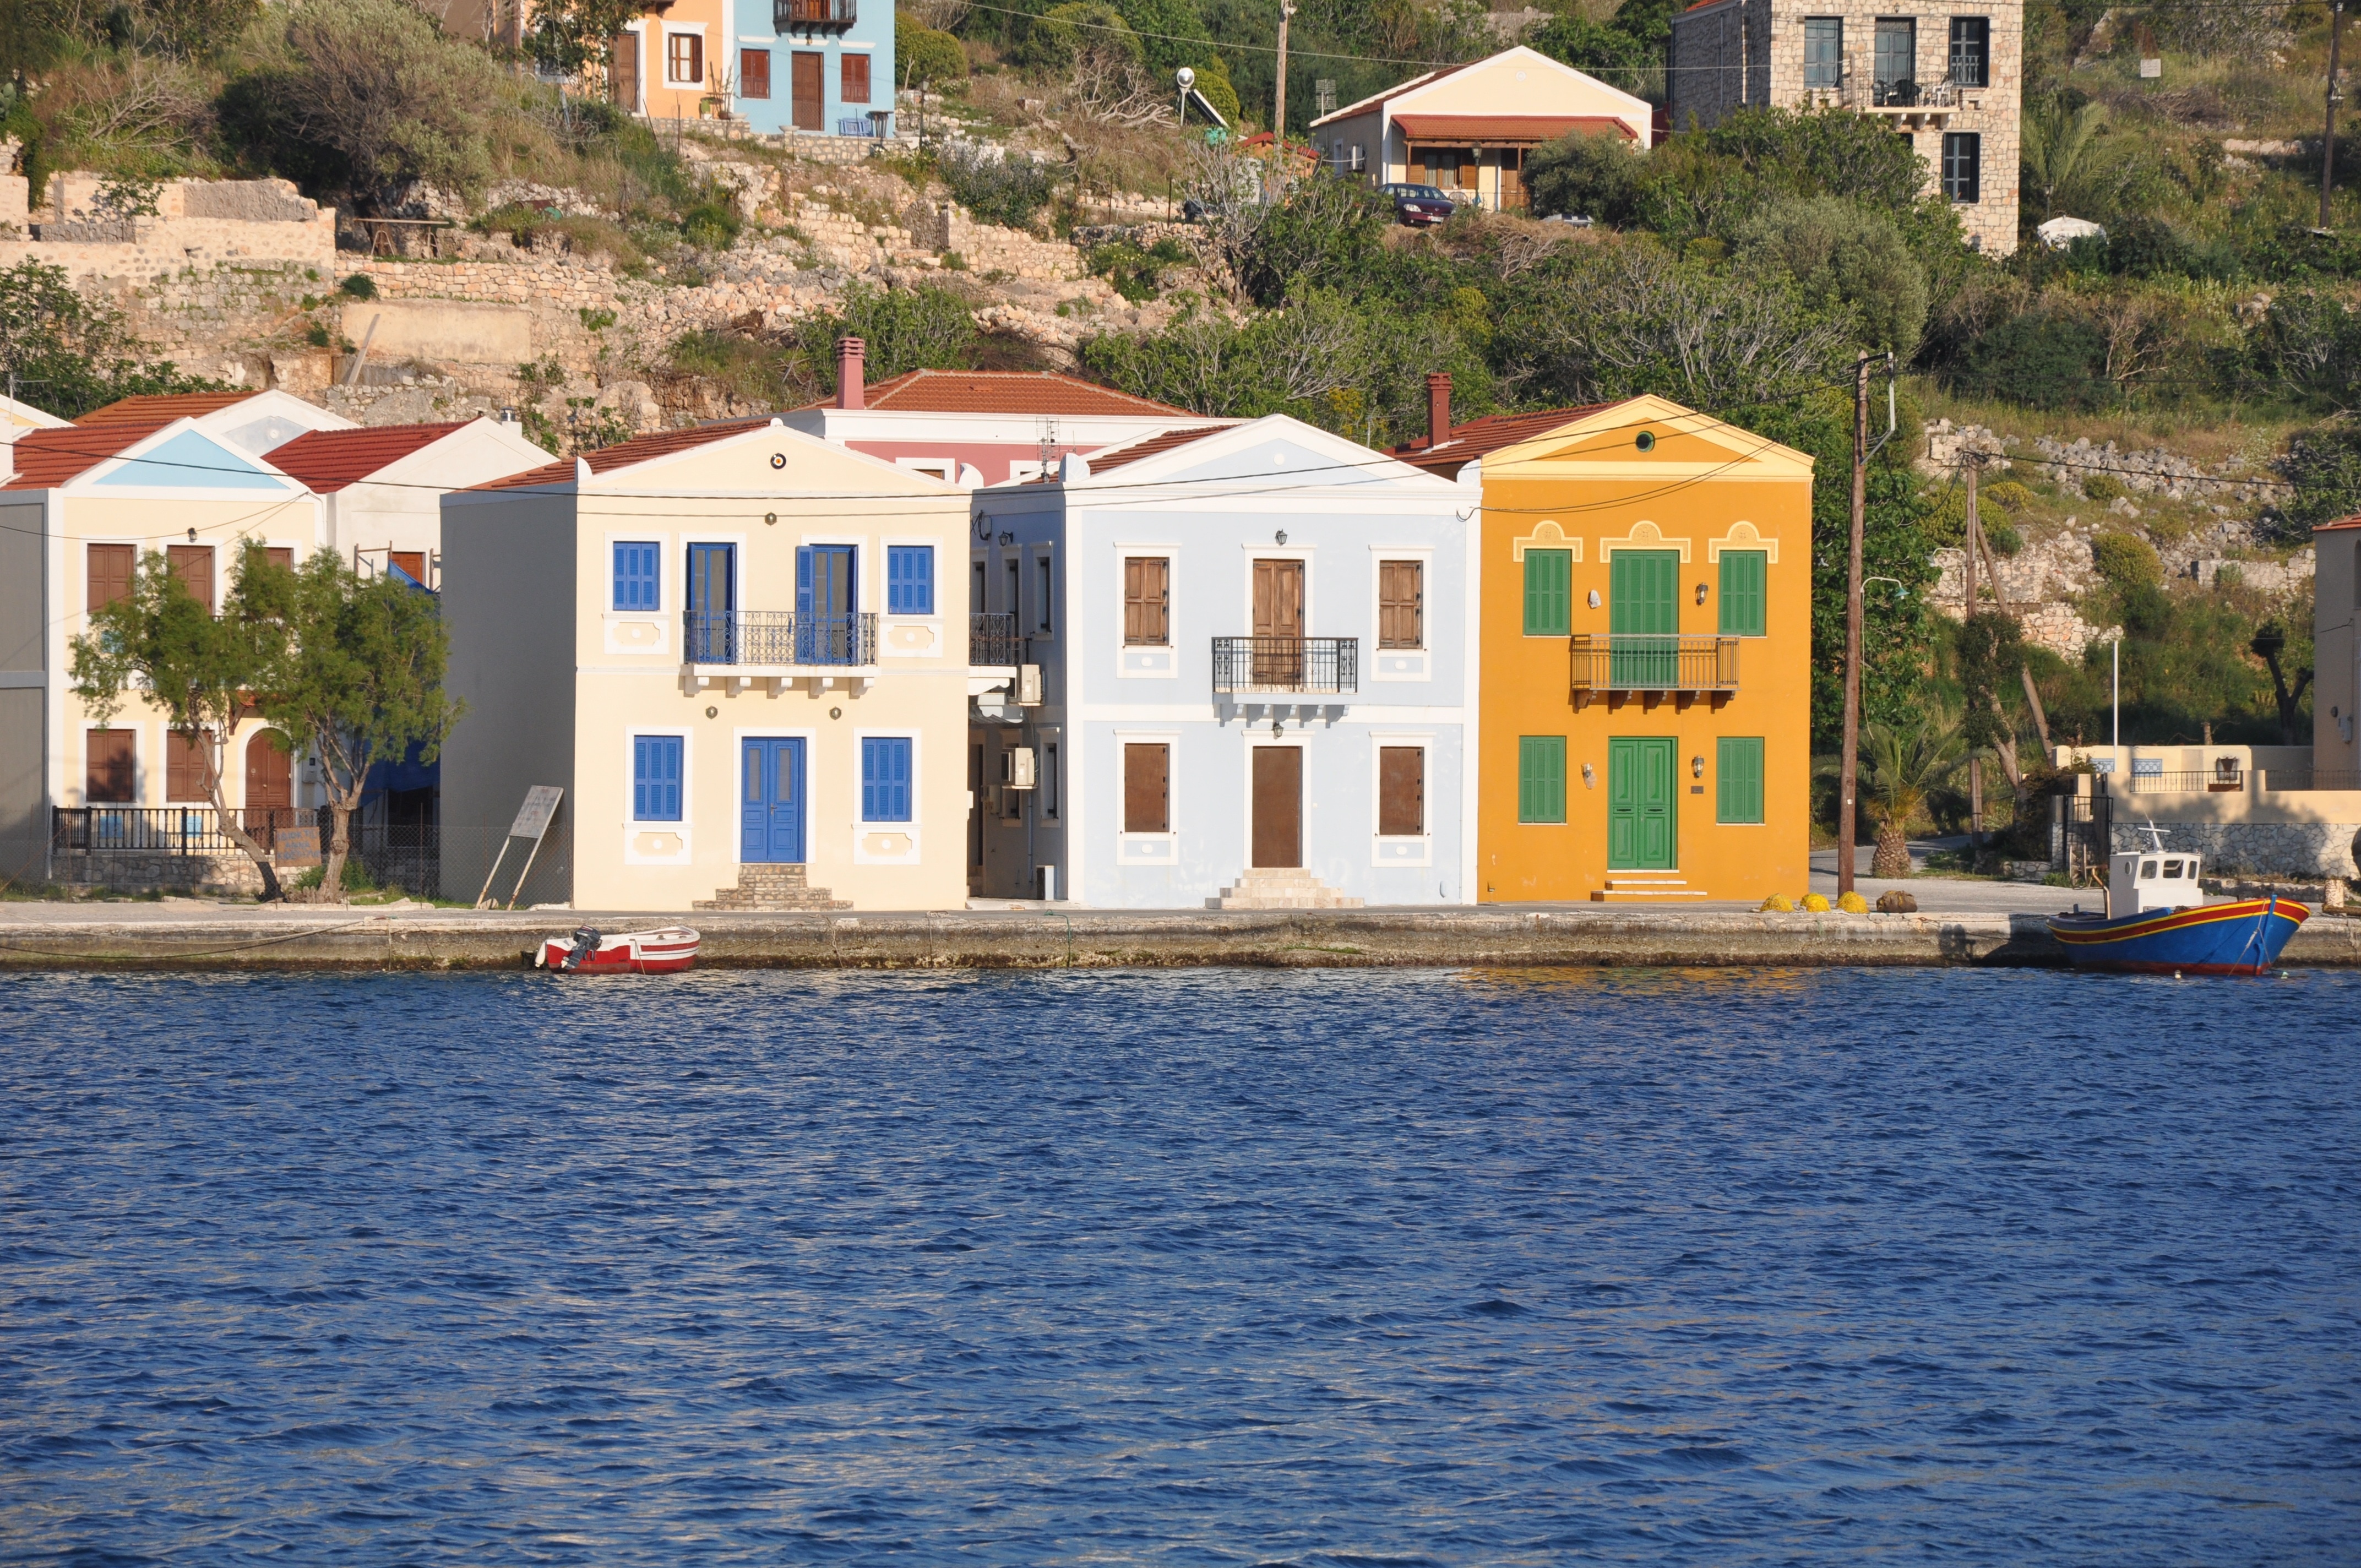 3 painted houses